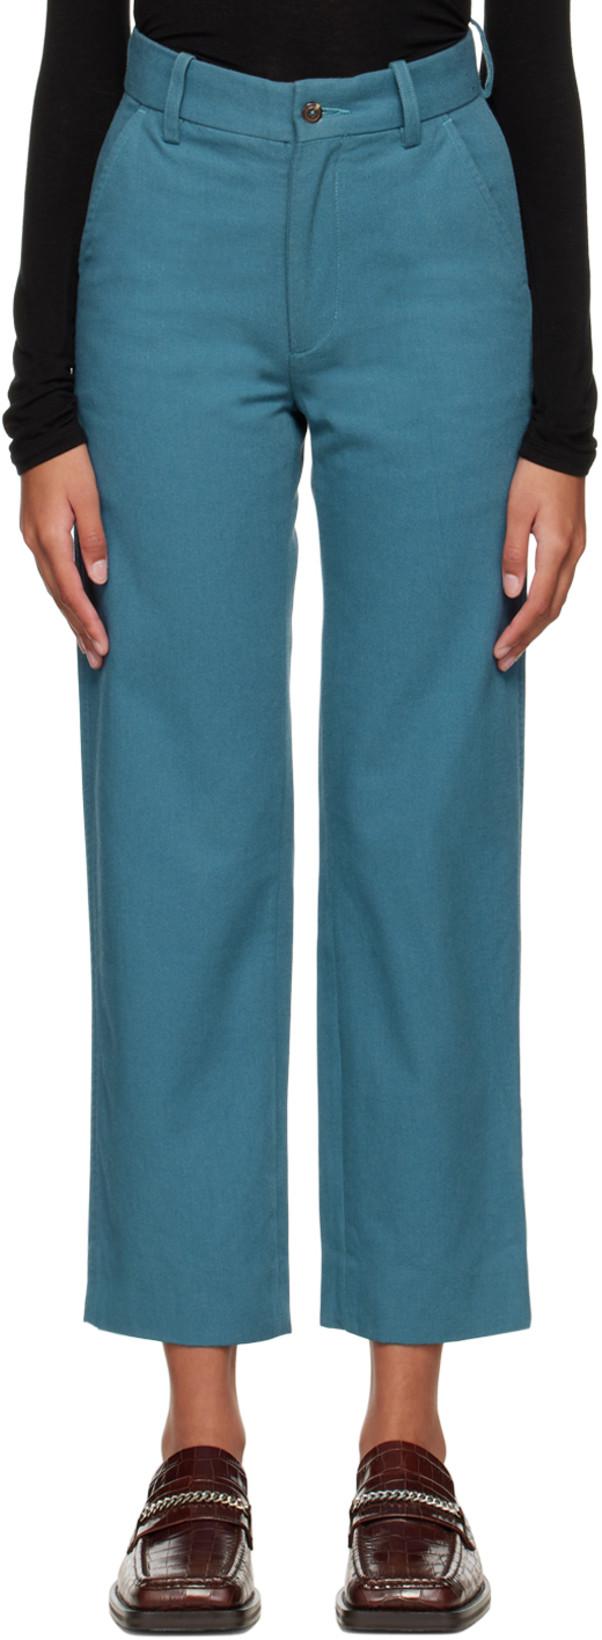 Blue Twill Standard Trousers by BODE